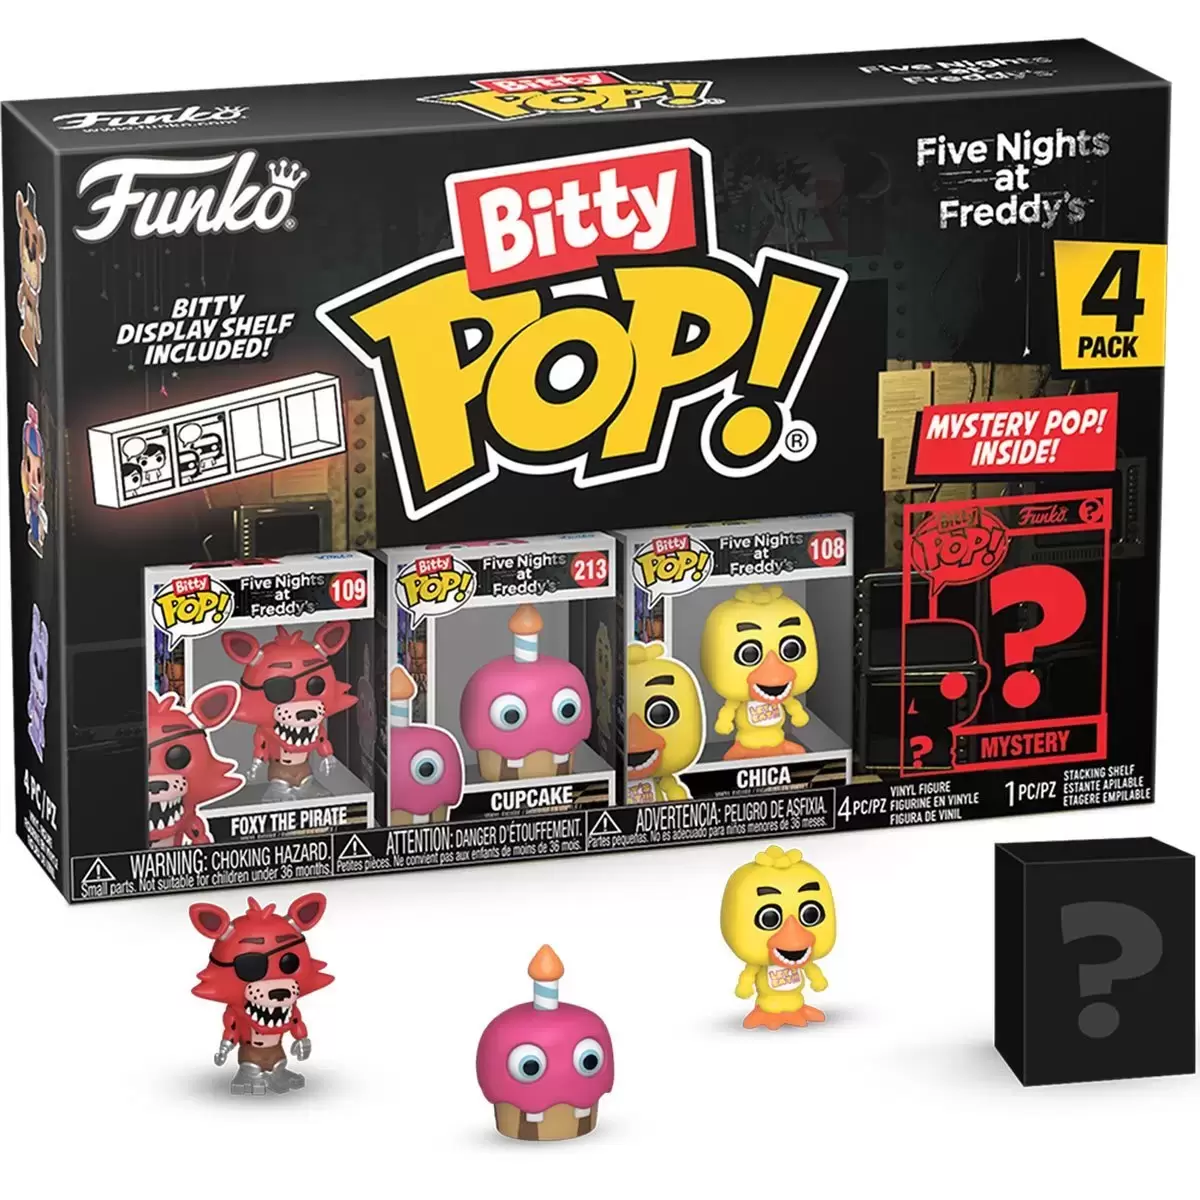 Bitty POP! - Five Nights at Freddy\'s - Foxy The Pirate, Cupcake, Chica & Mystery